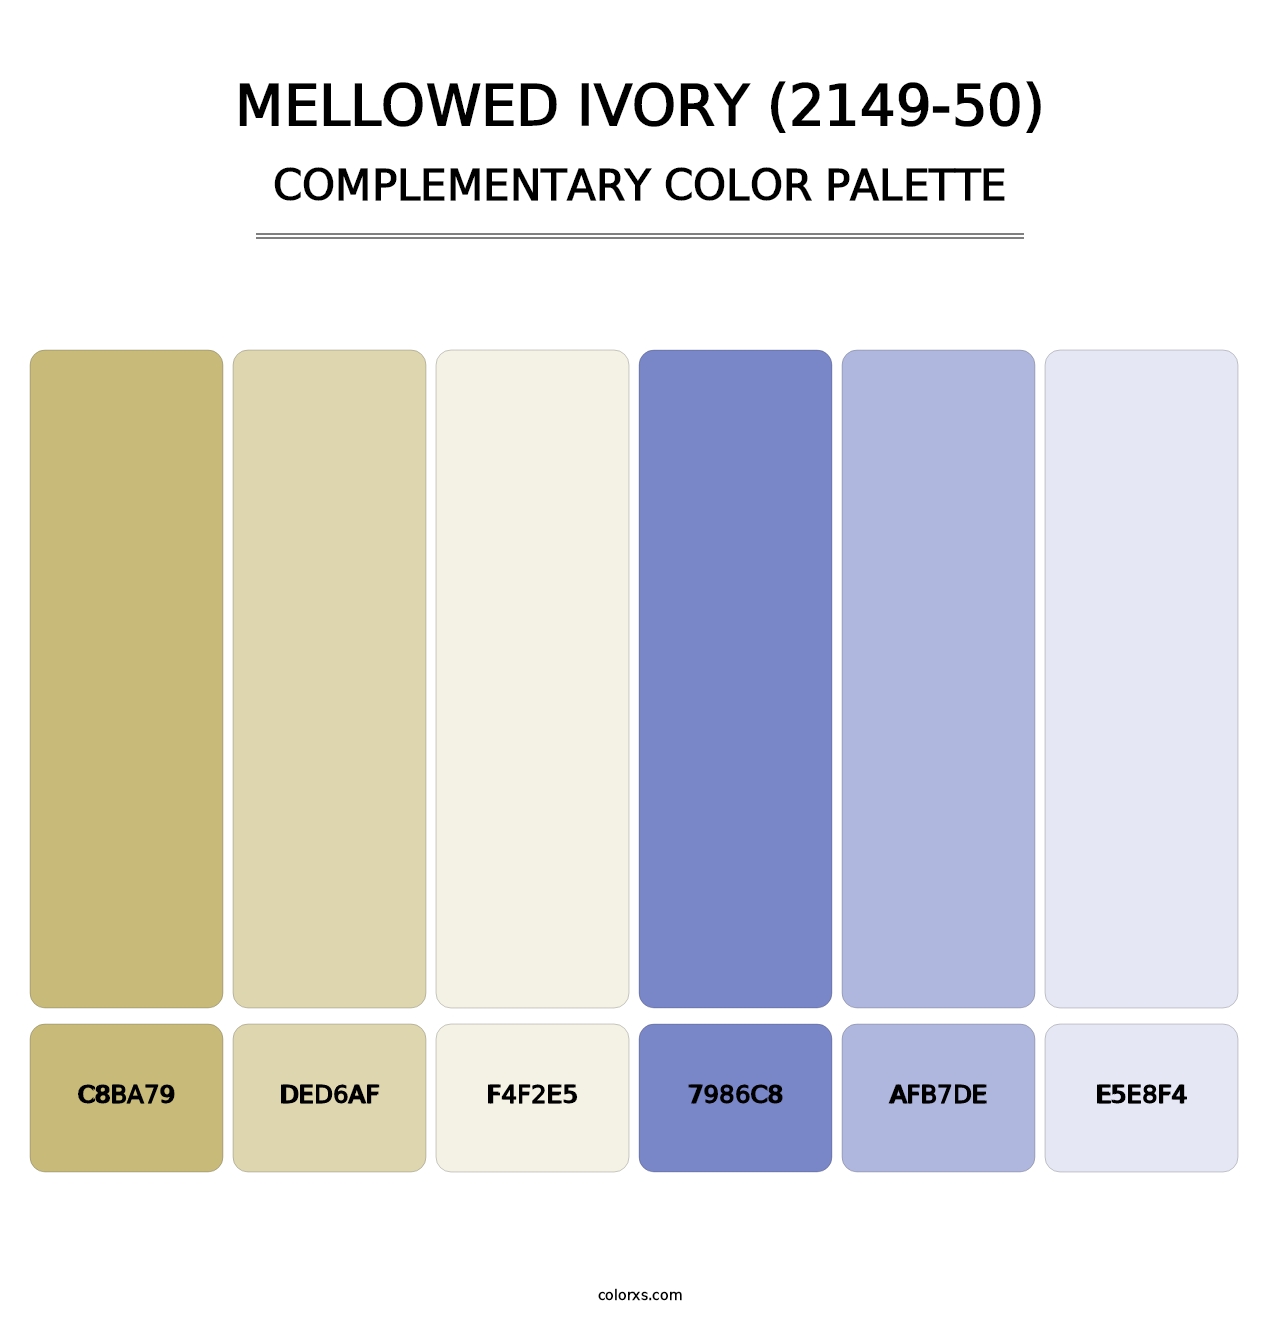 Mellowed Ivory (2149-50) - Complementary Color Palette